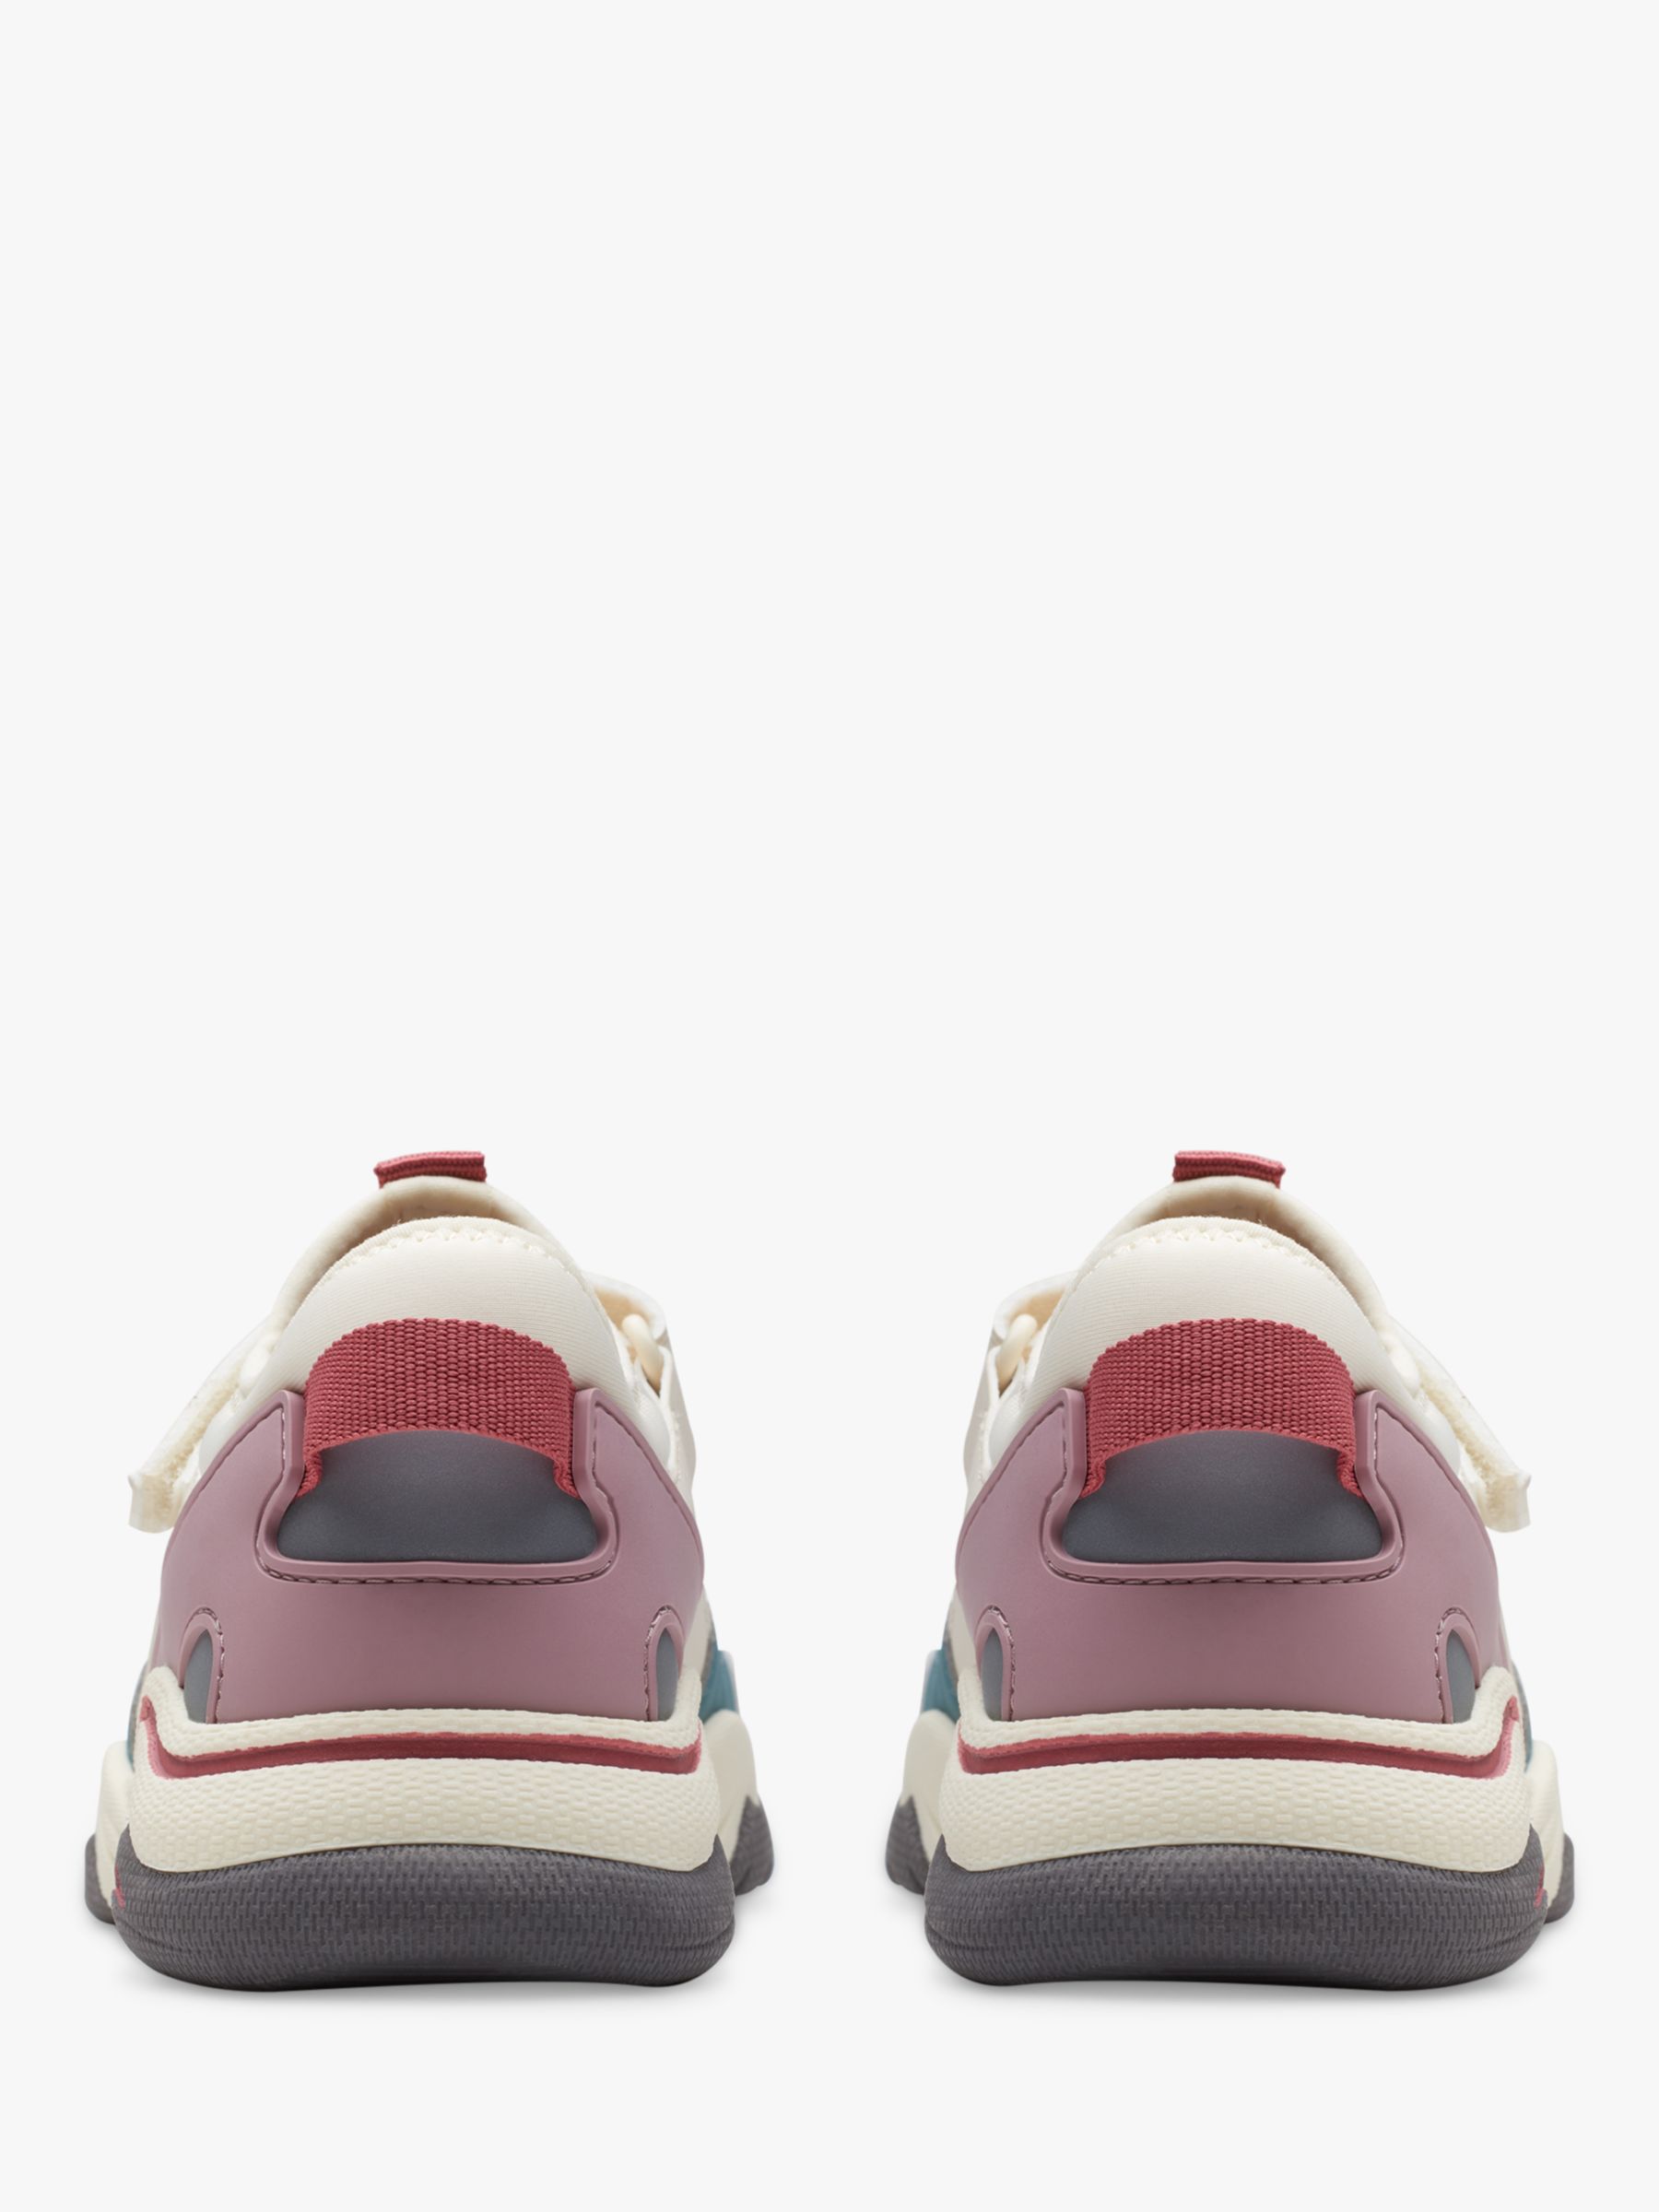 Clarks Kids' Feather Hop Trainers, Off White, 10G Jnr